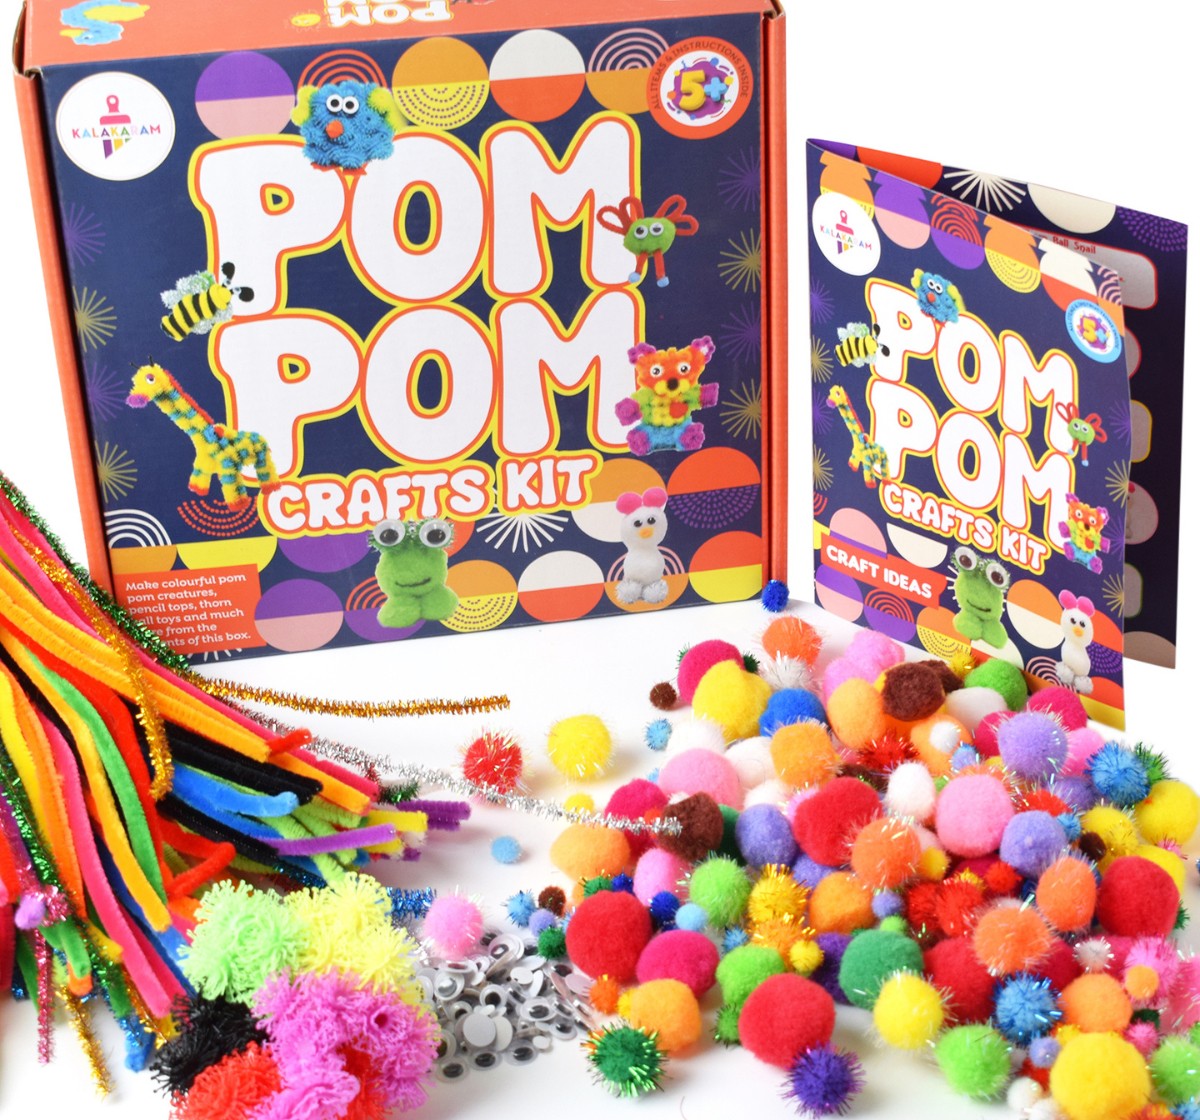 Kalakaram Pom Pom Crafts Kit for Kids, DIY Fun Activity for Kids 5 Year Old, DIY Hobby Crafts for Kids, Pom Pom Activity Kits, Multi Color, Art Craft Kit for Kids, 5Y+, Multicolour